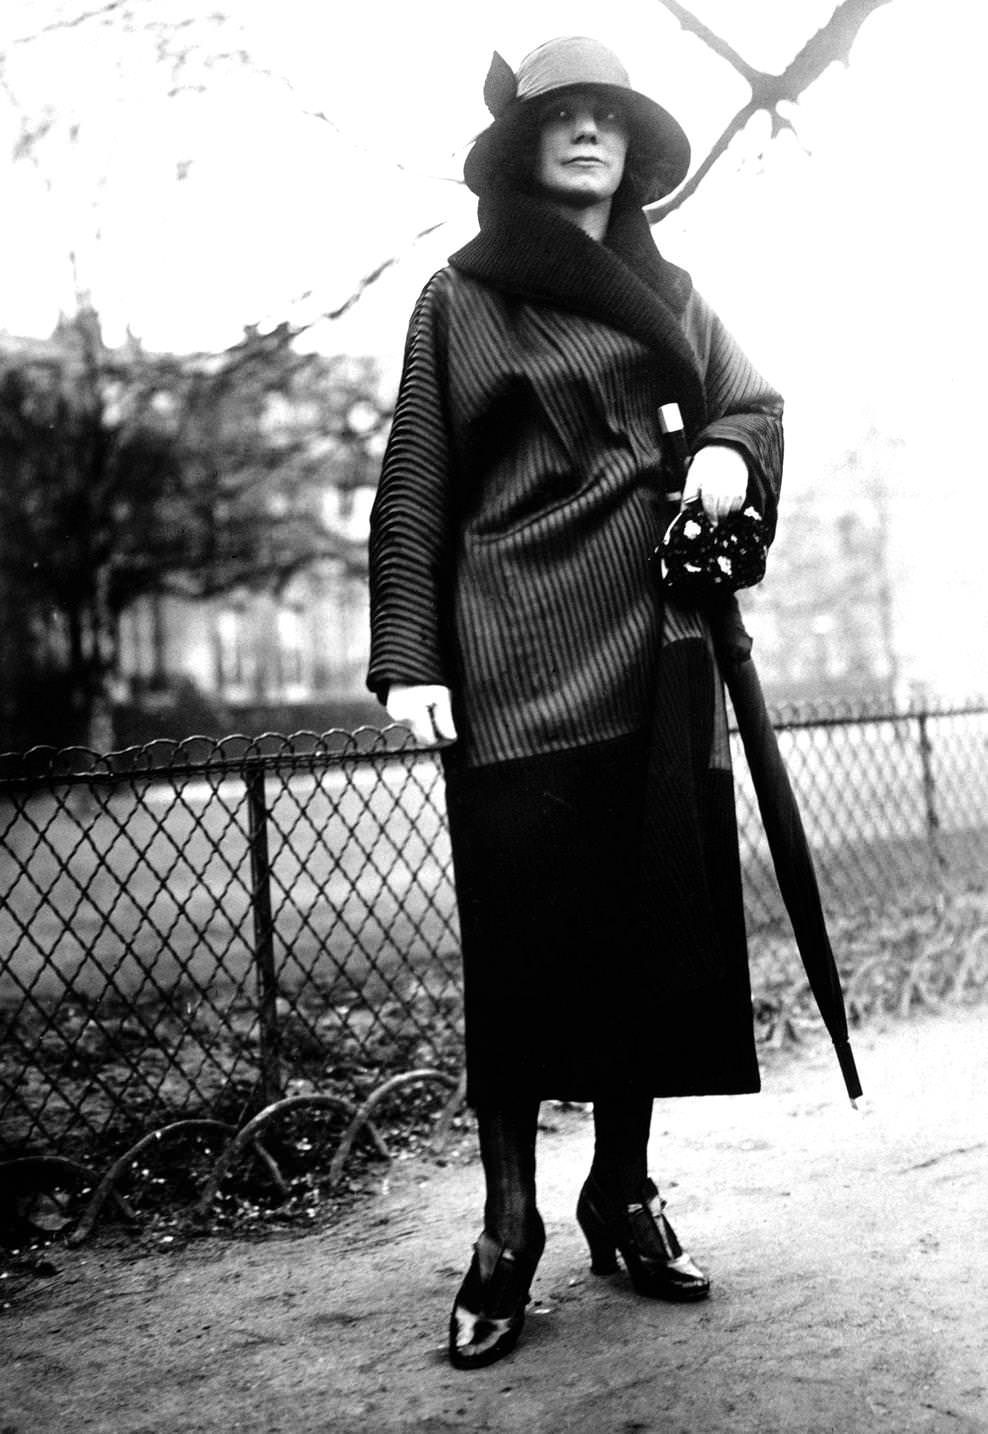 Fashion model wearing a short wrapover coat with fur collar, brimmed cloche hat, straight skirt and carries an umbrella, 1920s